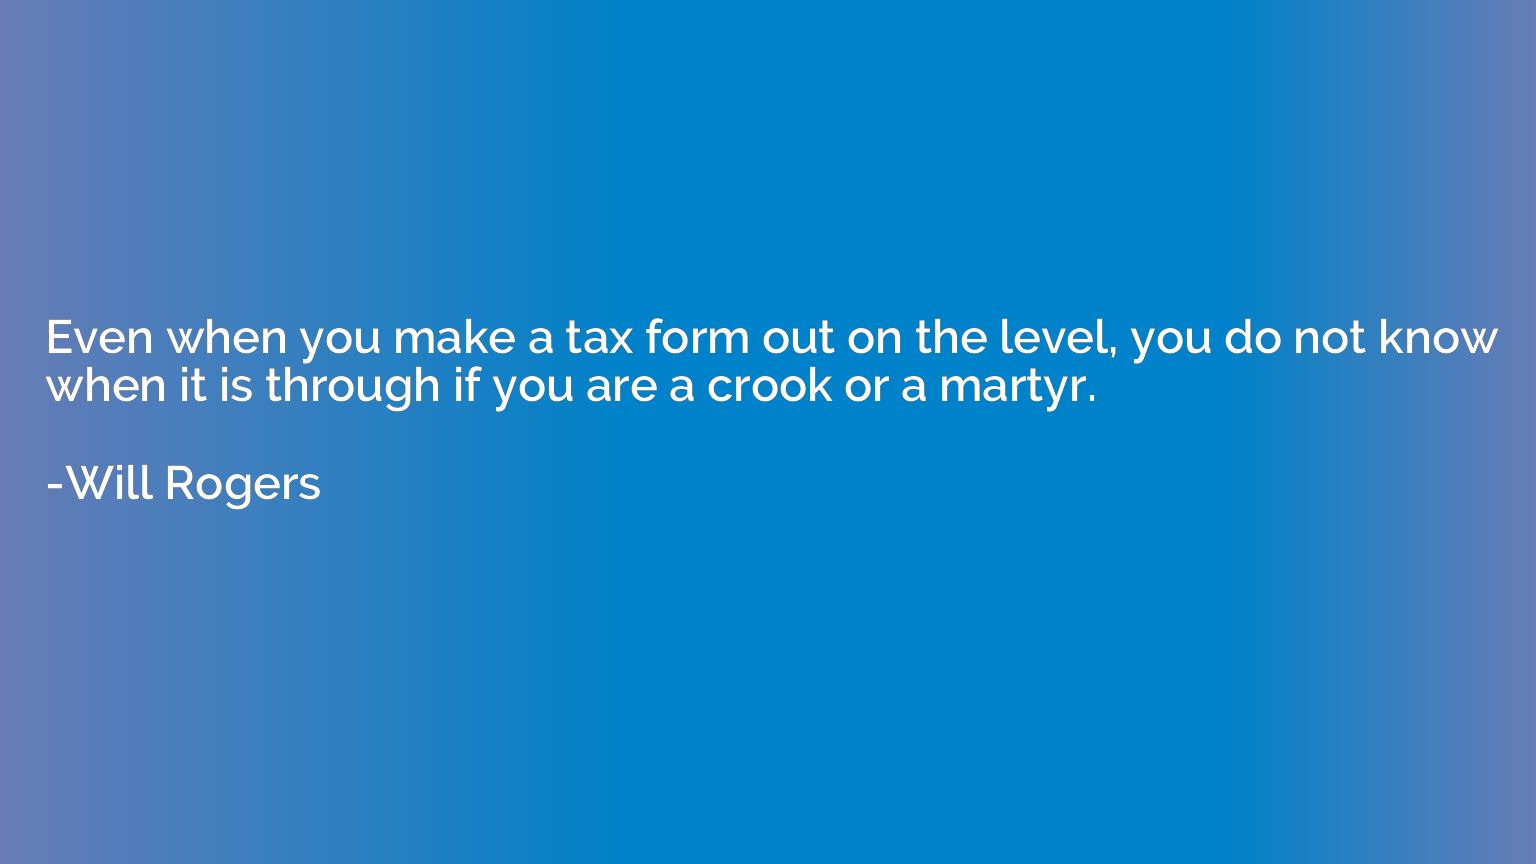 Even when you make a tax form out on the level, you do not k